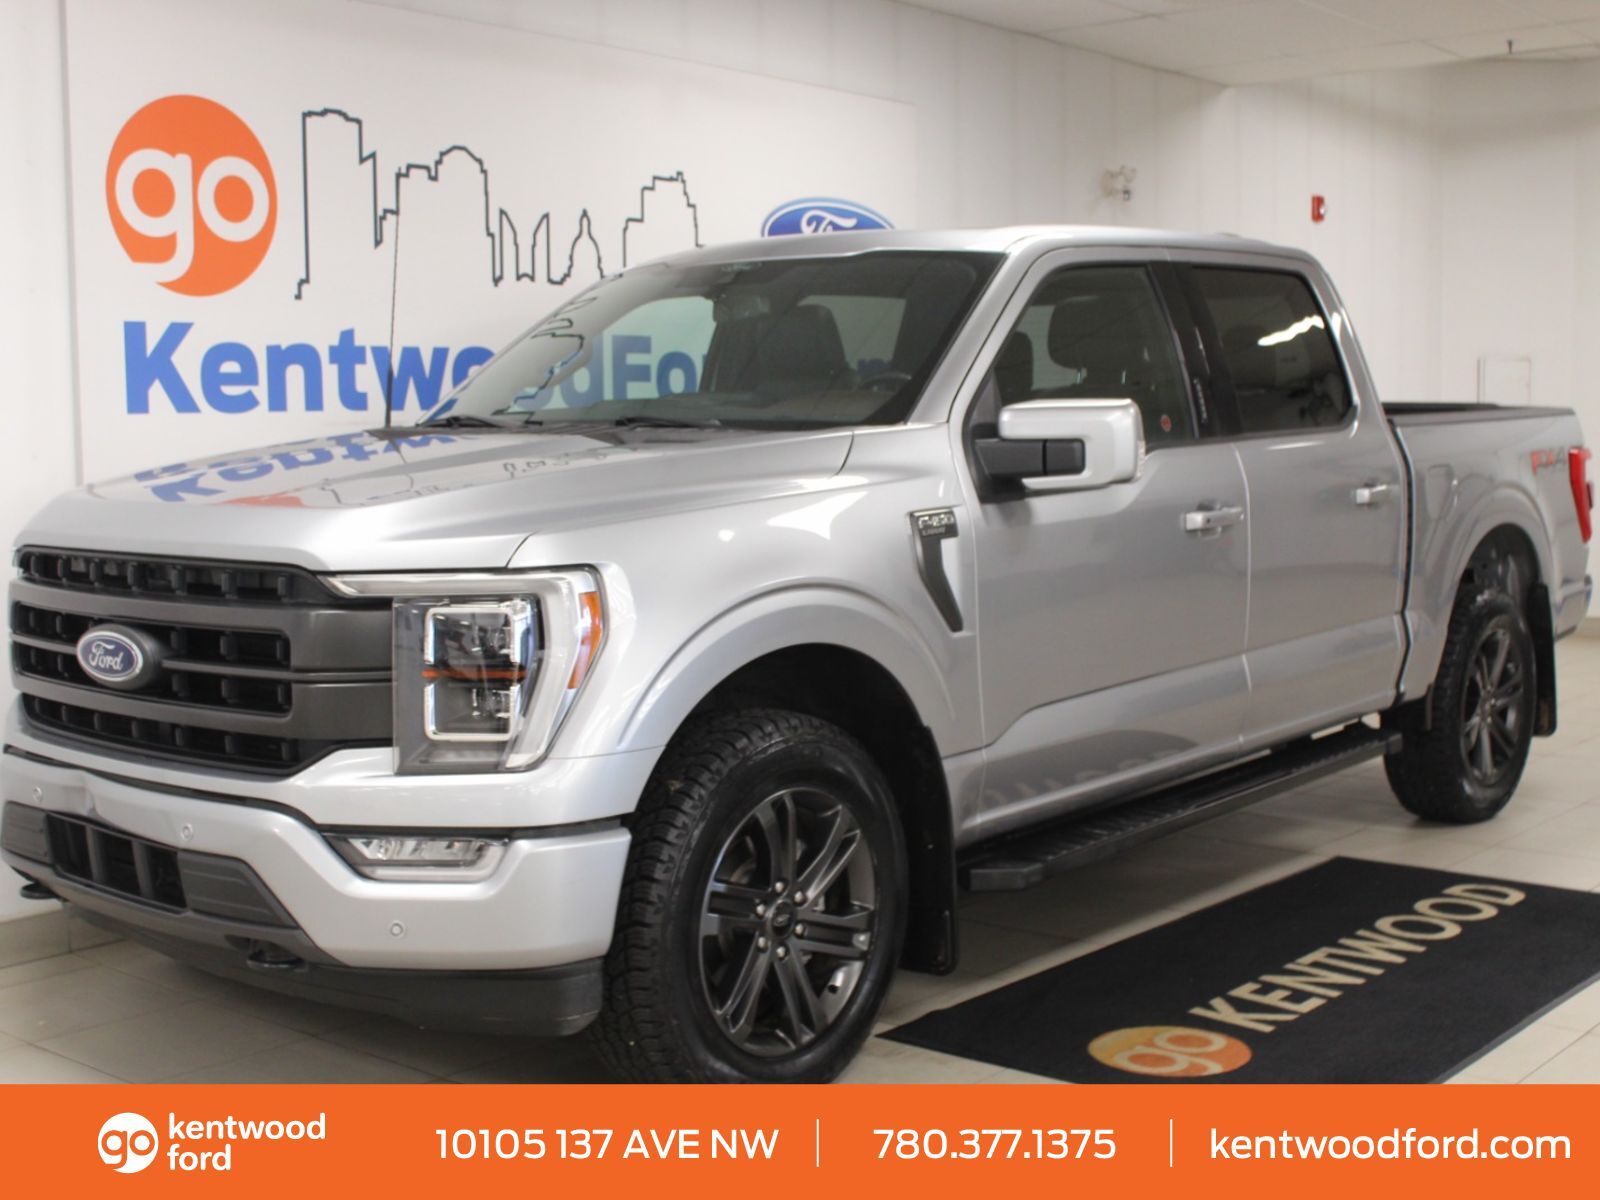 2022 Ford F-150 Lariat | 502a | Sport | 20s | Power Tailgate | FX4